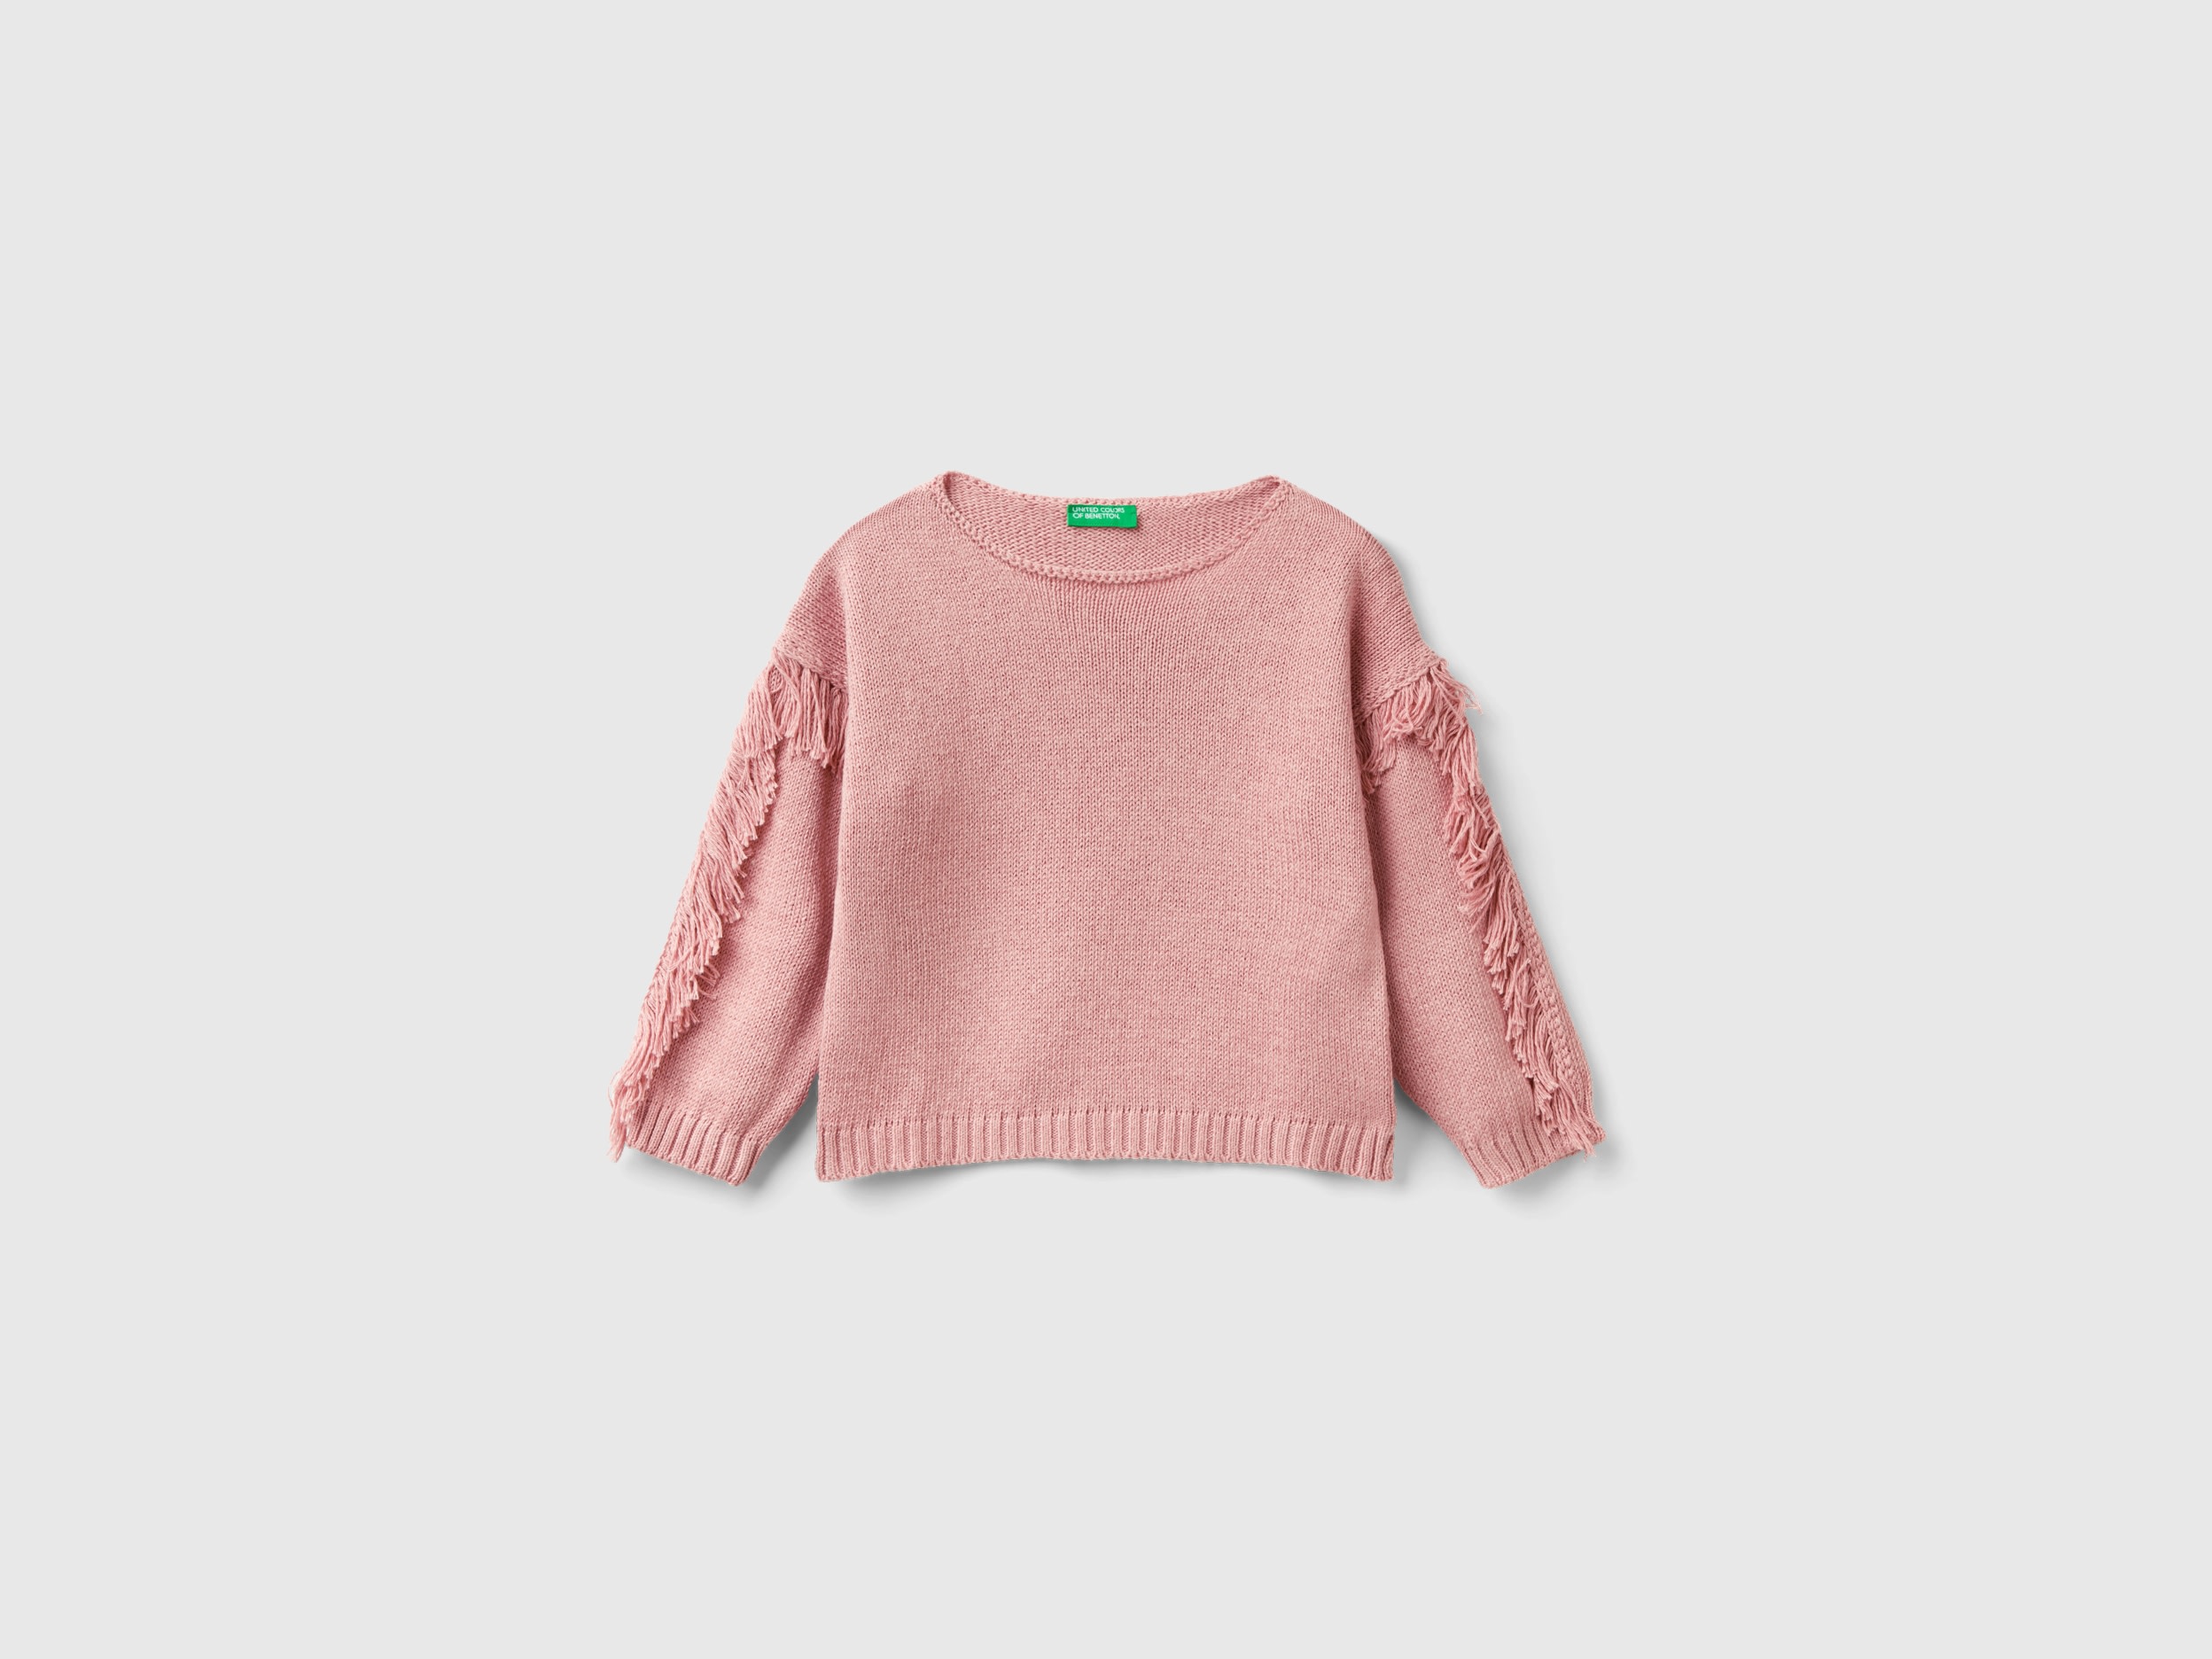 Image of Benetton, Sweater With Fringe, size 82, Pink, Kids